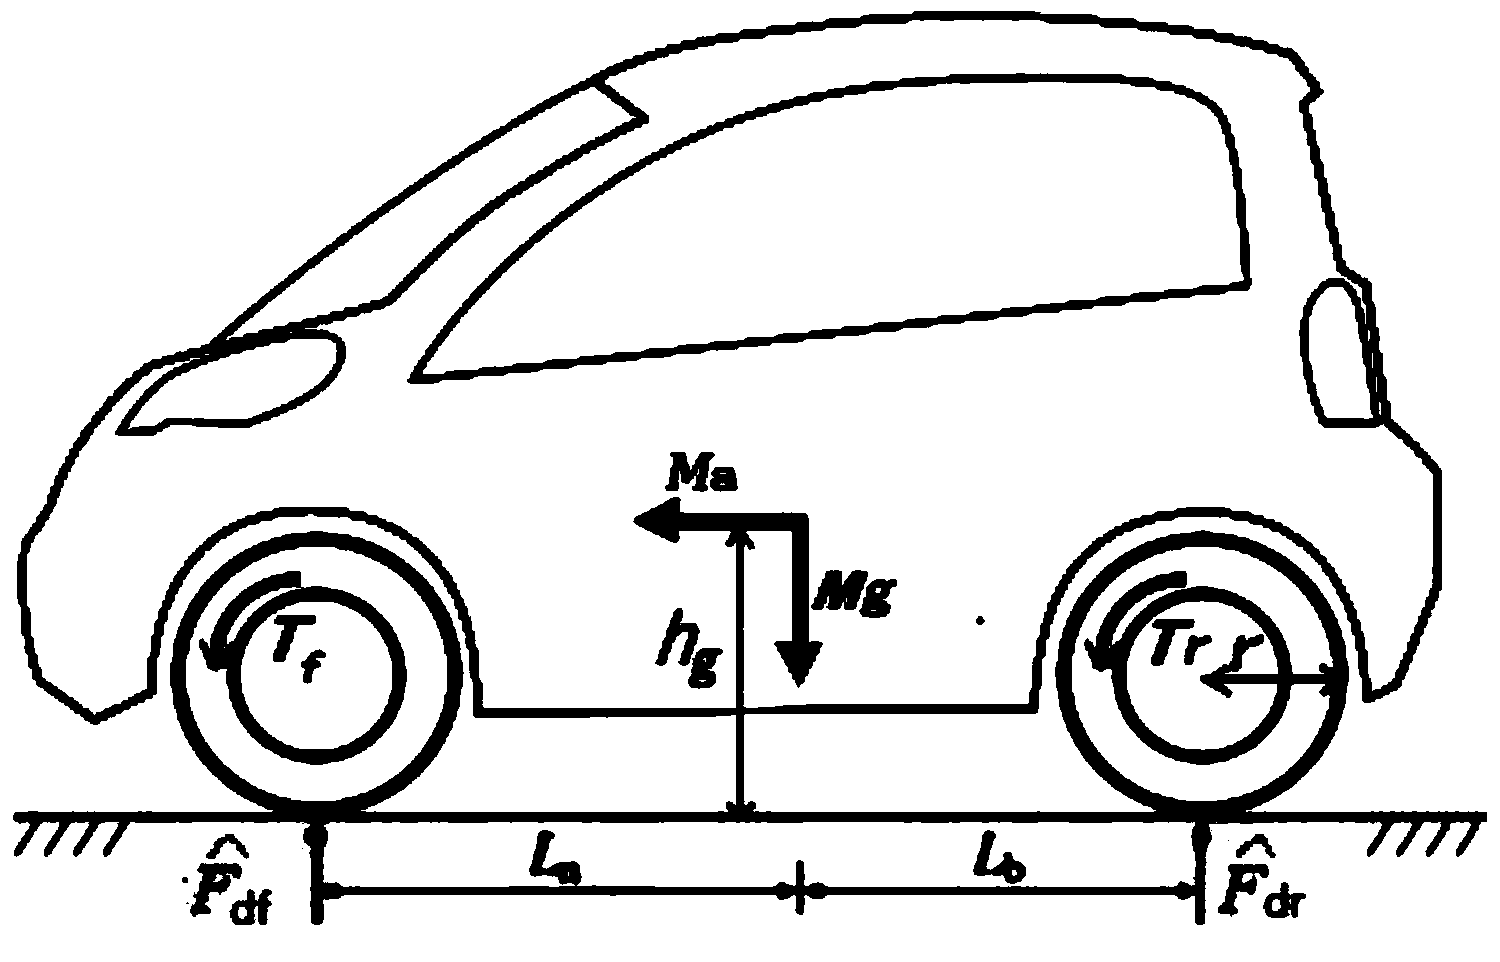 Drive skid prevention control algorithm for four-wheel independent drive electric automobile